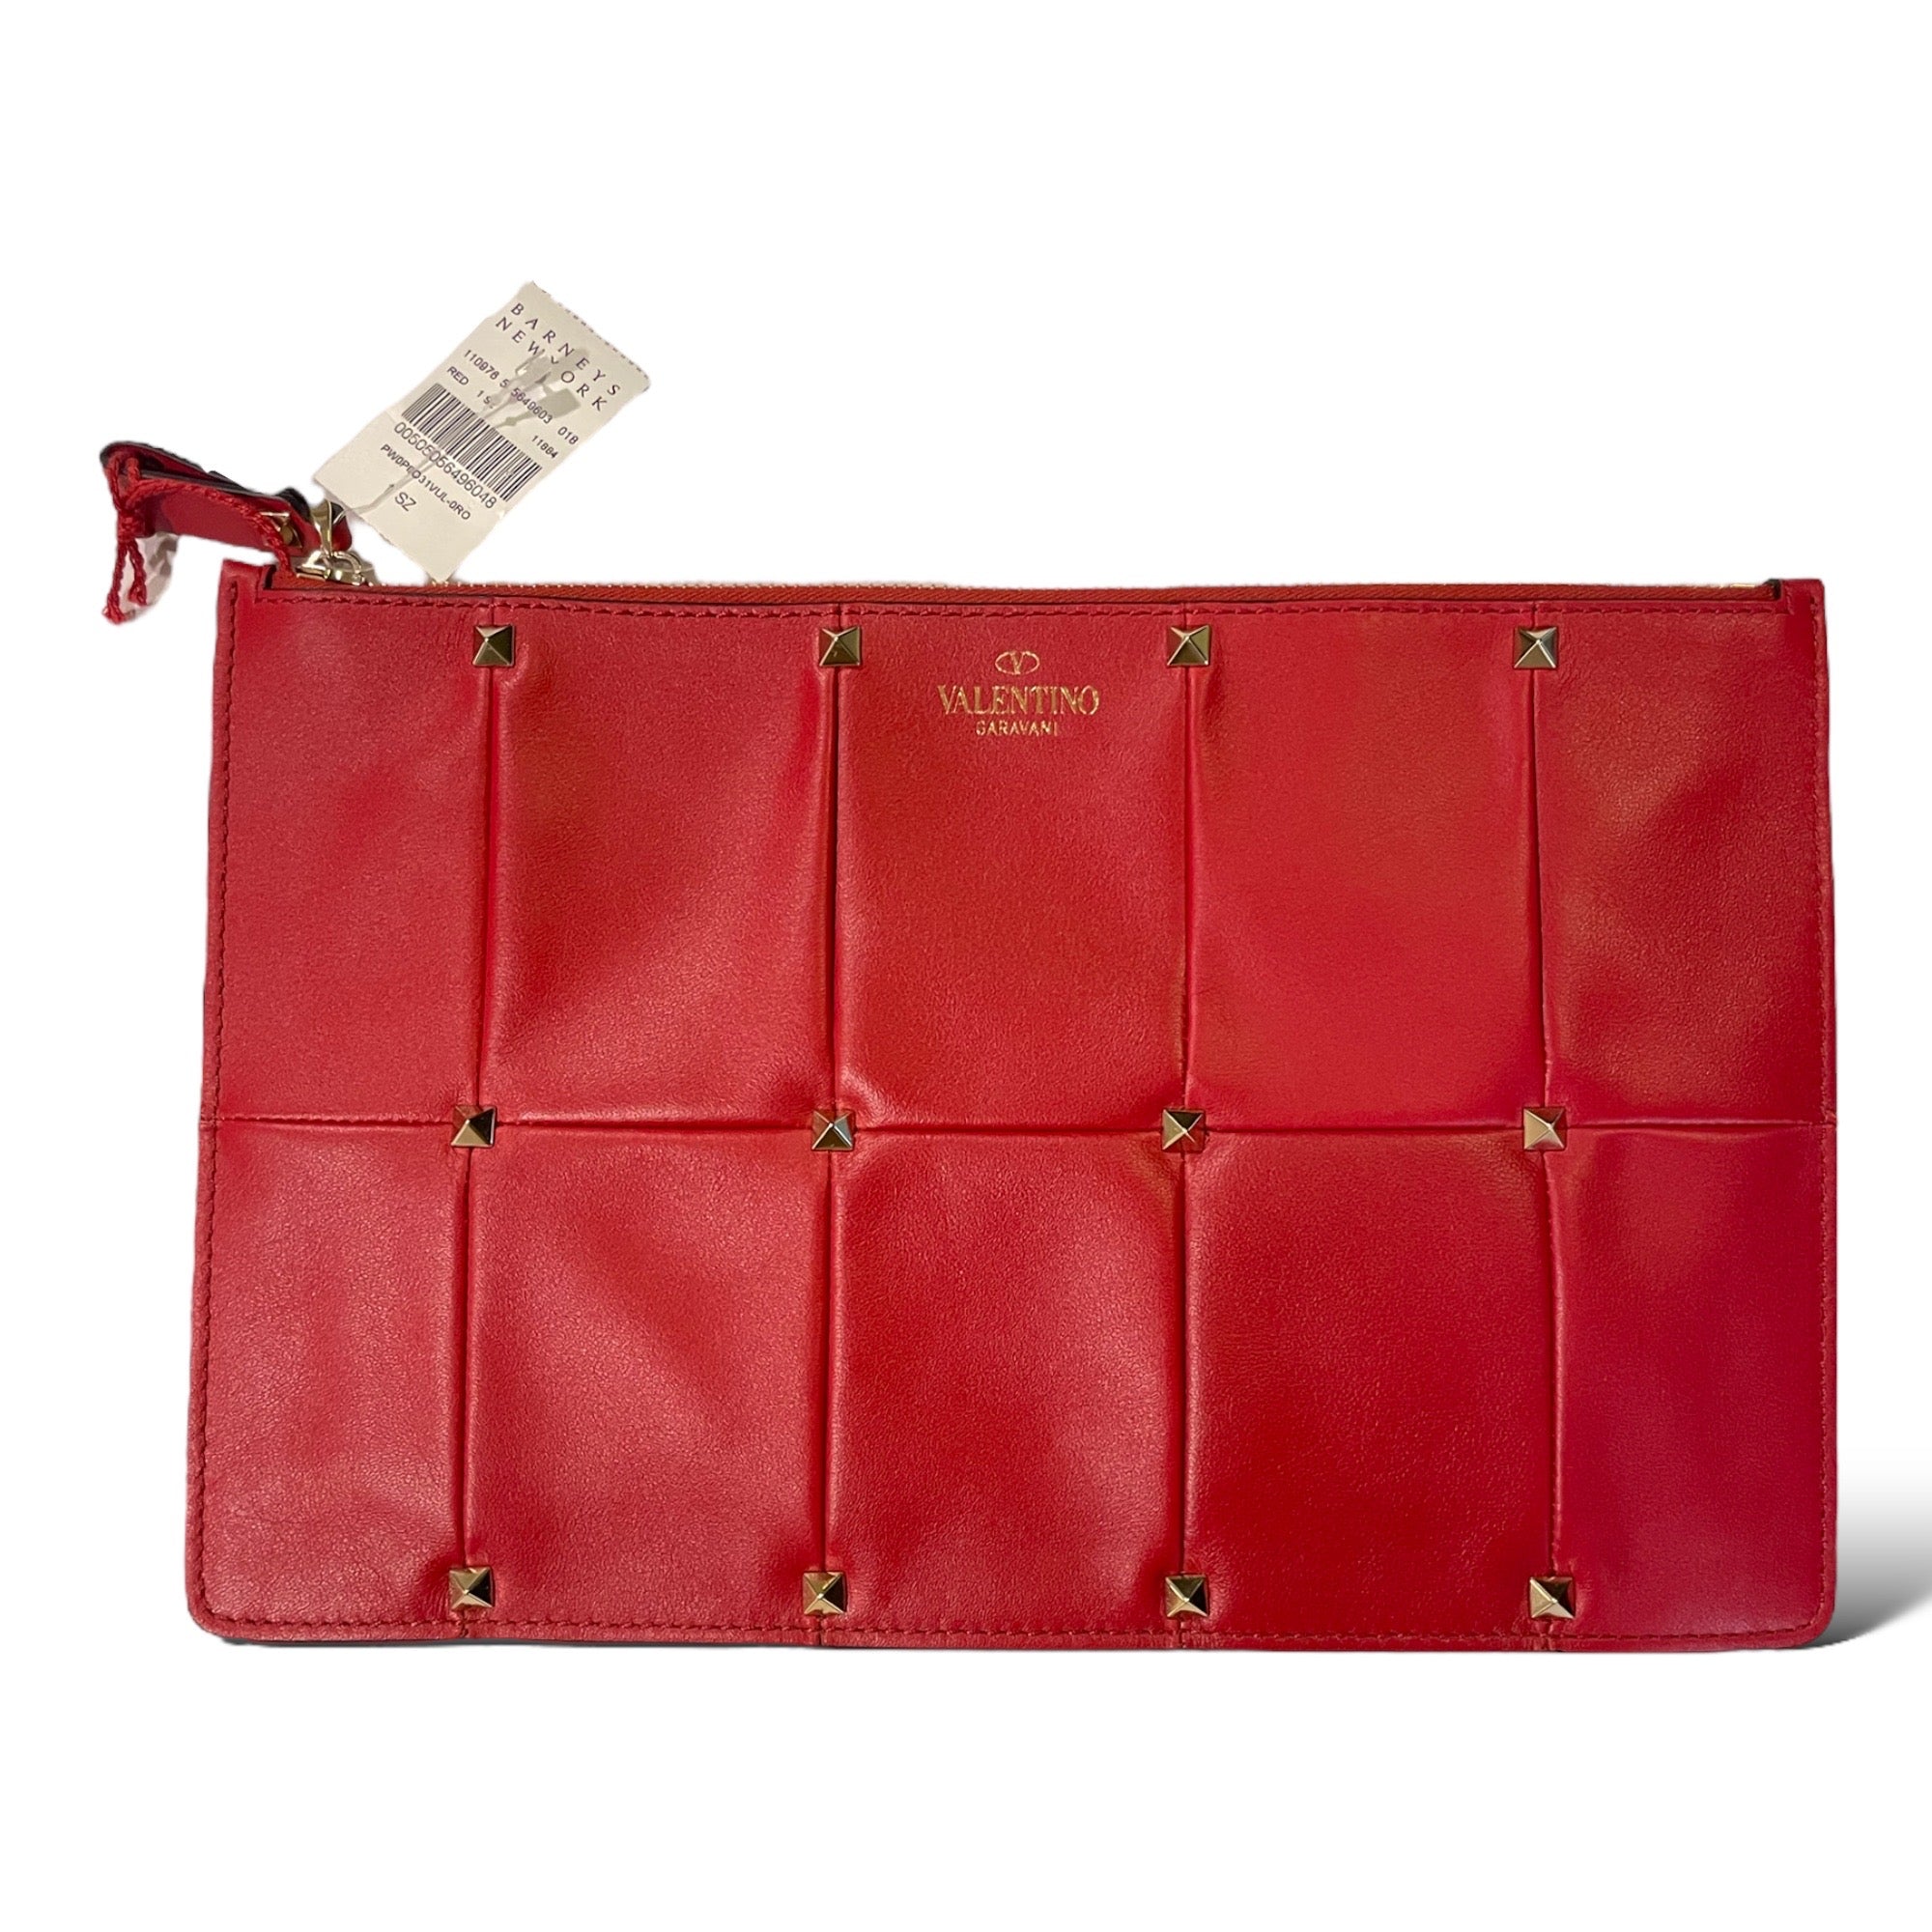 VALENTINO GARAVANI Red Quilted Leather with Gold Stud Accents Clutch NWT